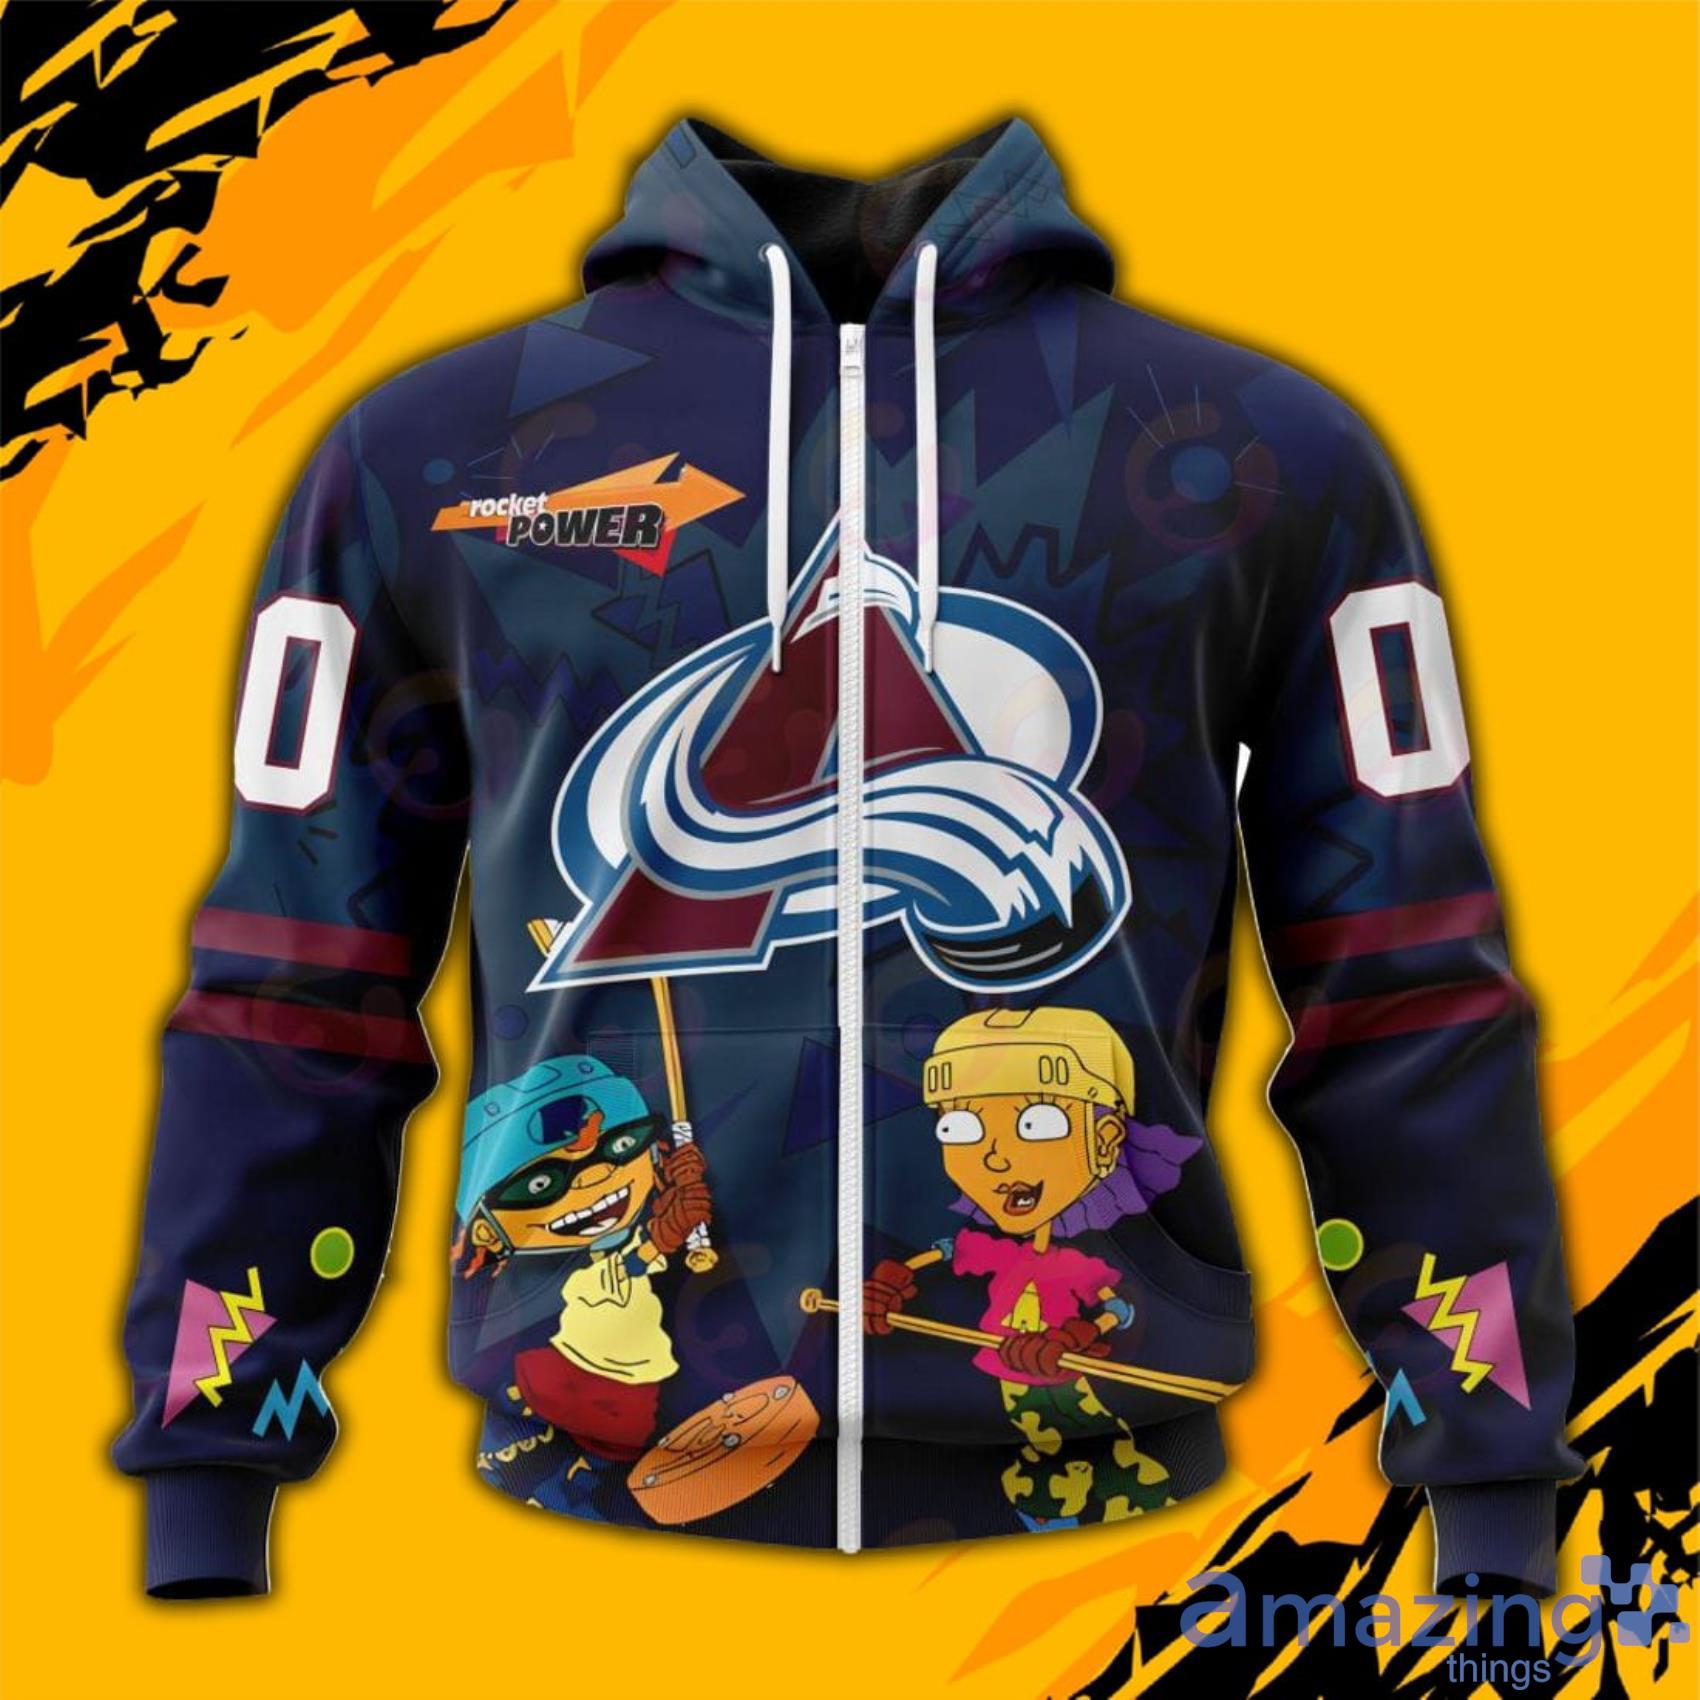 Nhl Colorado Avalanche 3D Hockey Jersey Personalized Name Number